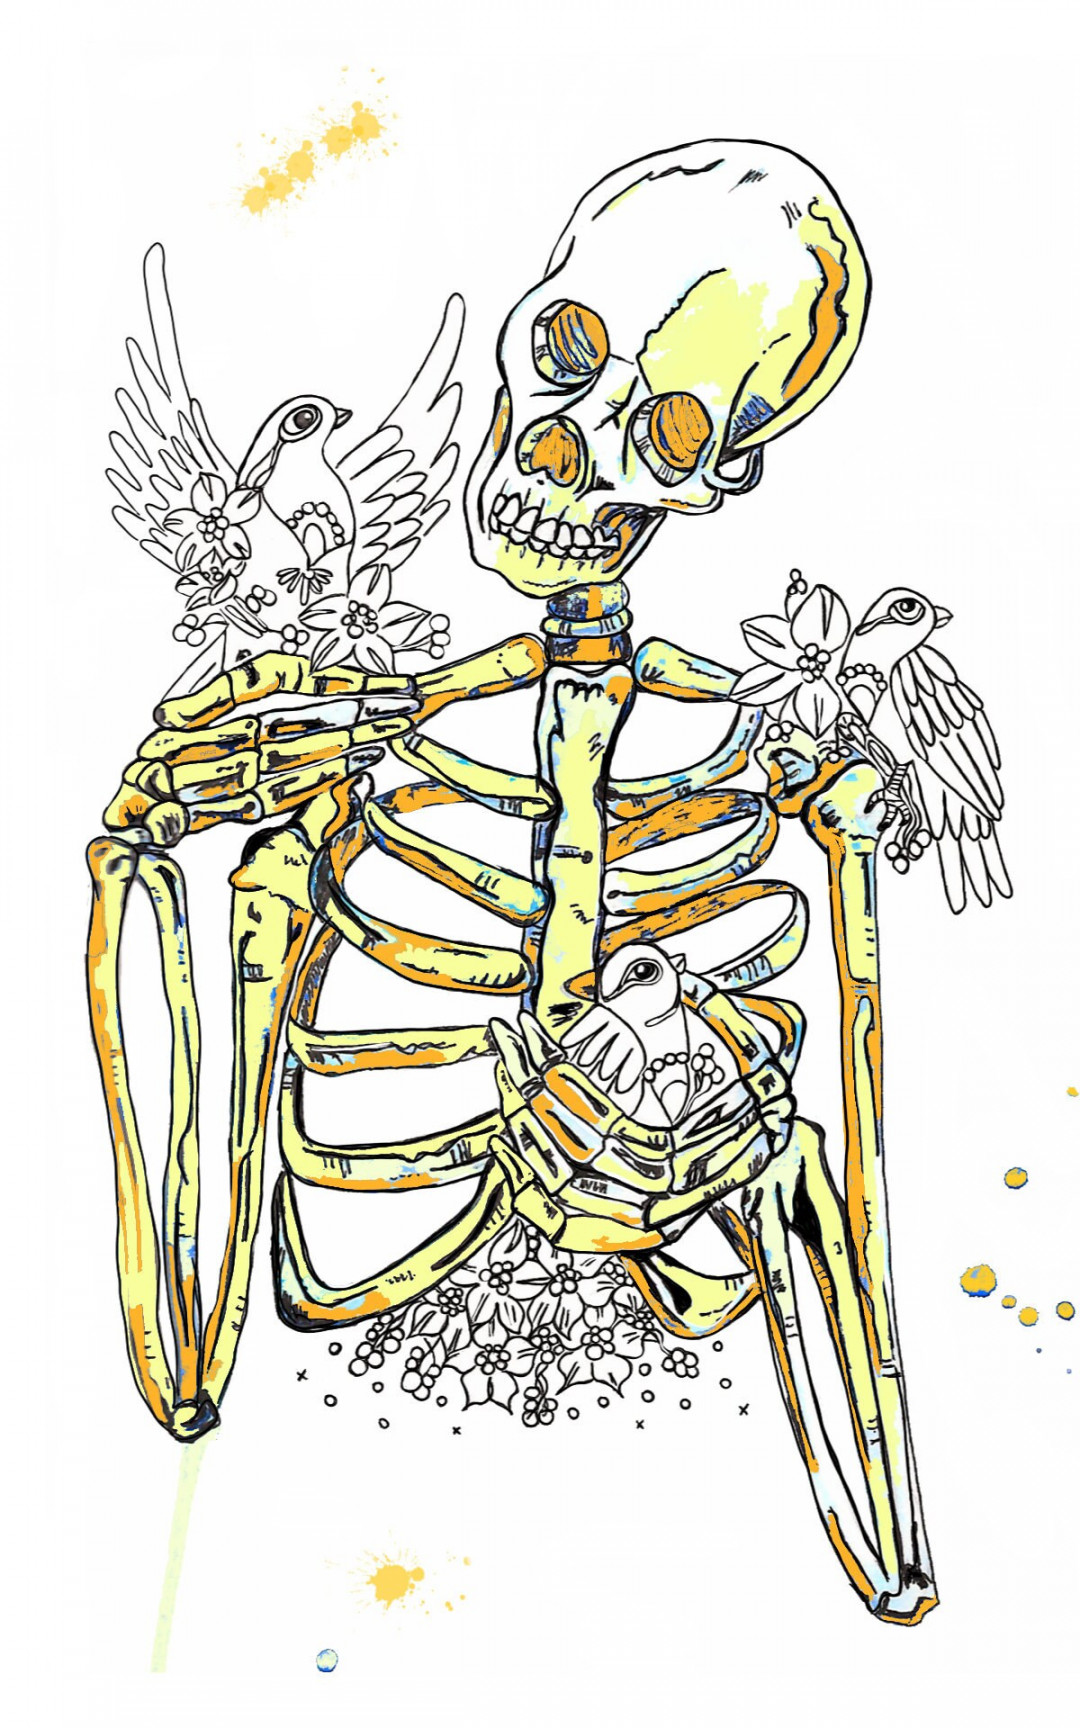 FREEDOM Yellow Skeleton & Dove A Art Print and Pin Badge